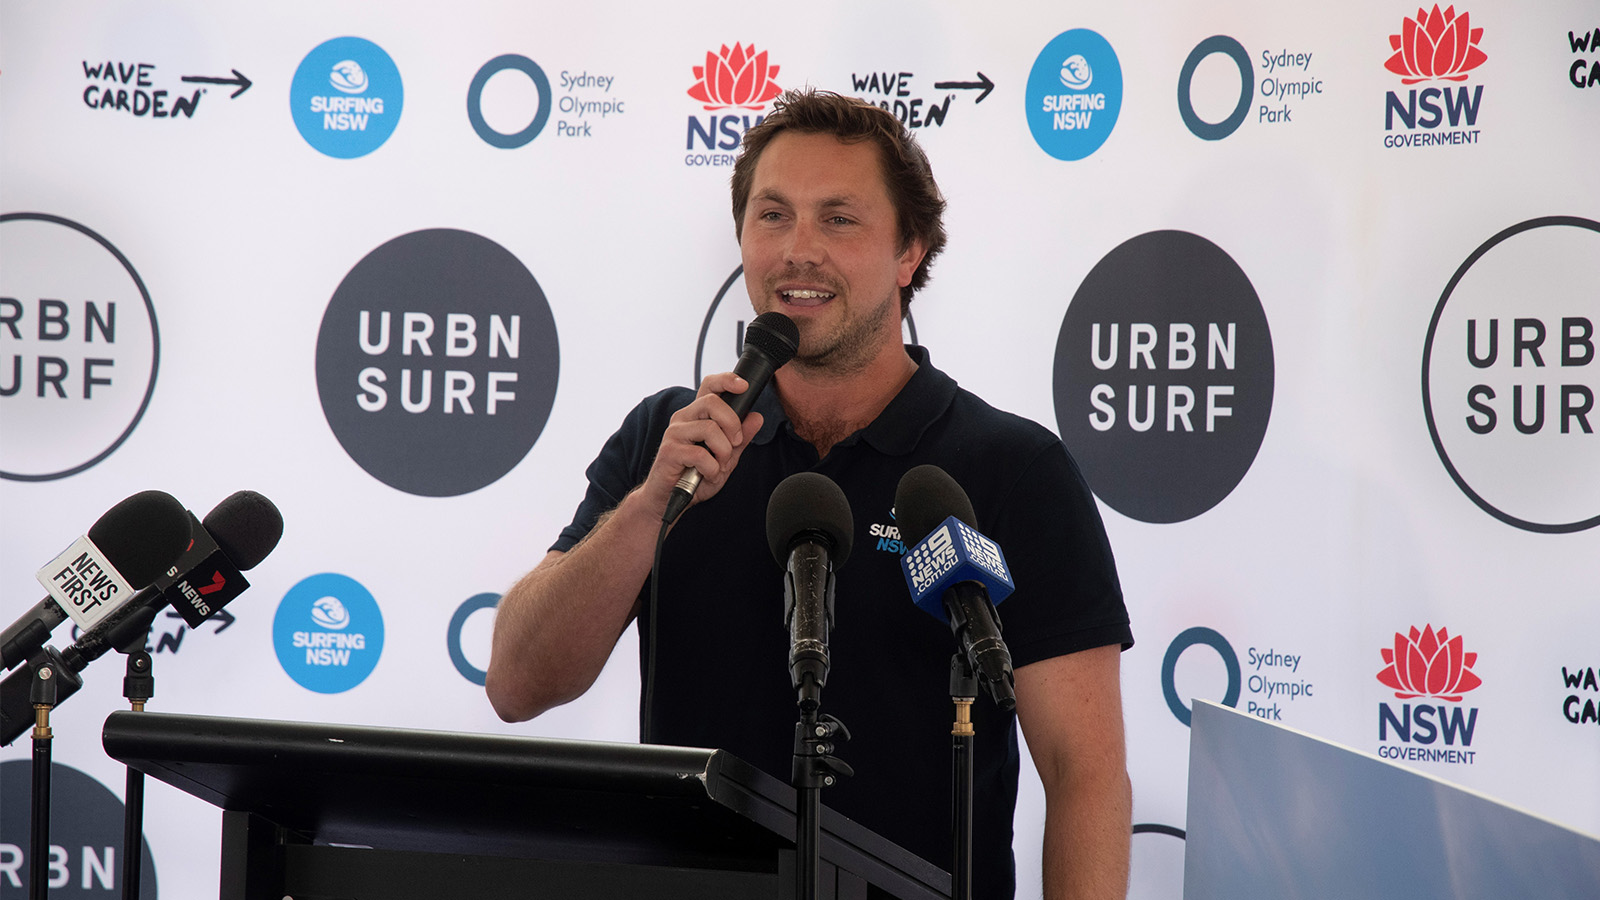 Luke Madden is speaking at a press conference. He is wearing a black t-shirt, holding a microphone in front of a Surfing NSW media wall. There is a black podium in front of him with microphones placed on it.